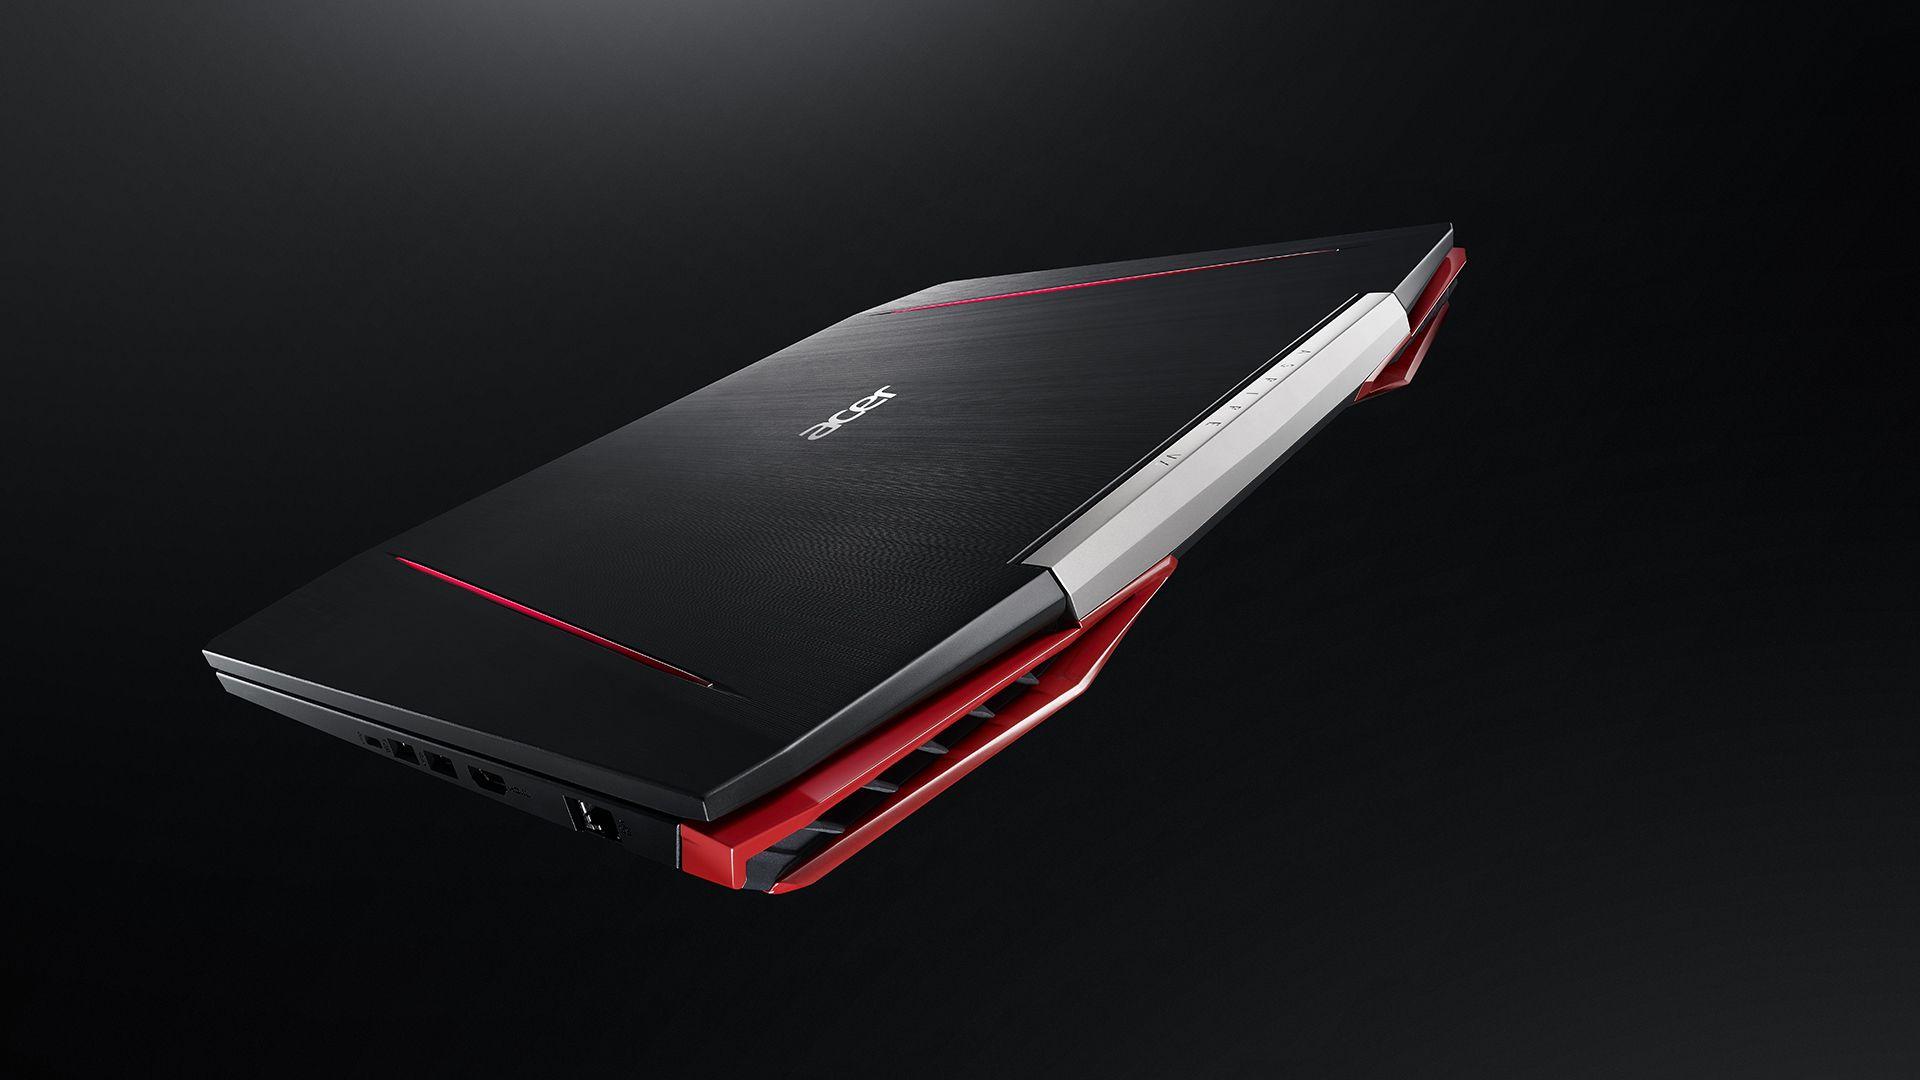 Acer's thin, suave gaming laptops pack a huge graphics punch